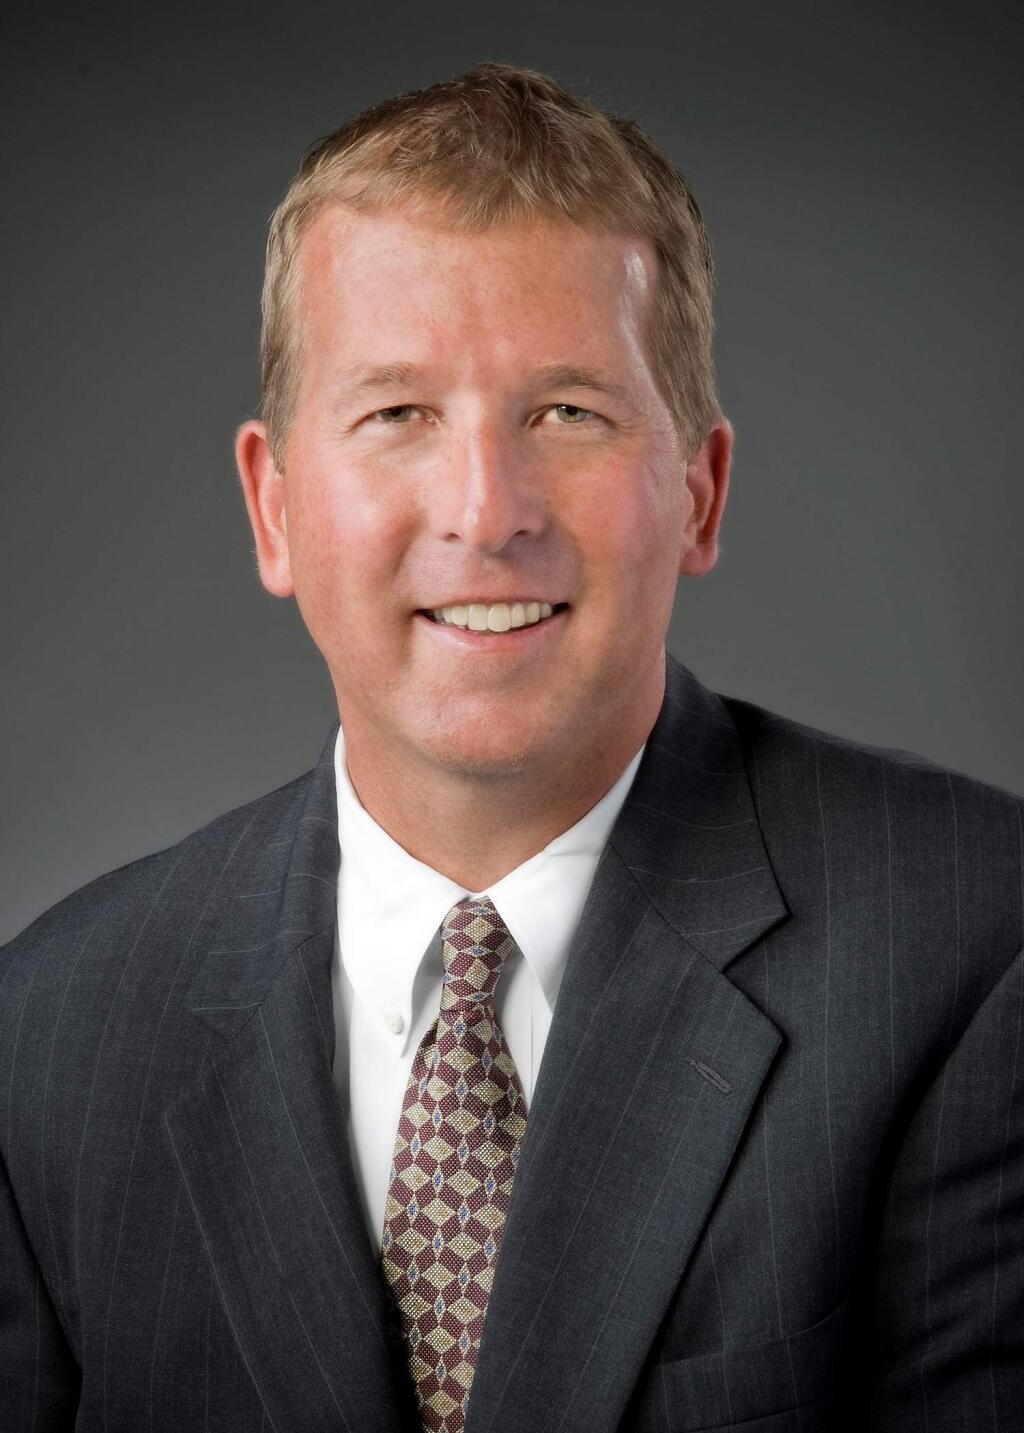 Mike Parr, Employee Benefits Consultant, Northwest Insurance Agency Inc, a division of George Petersen Insurance Agency